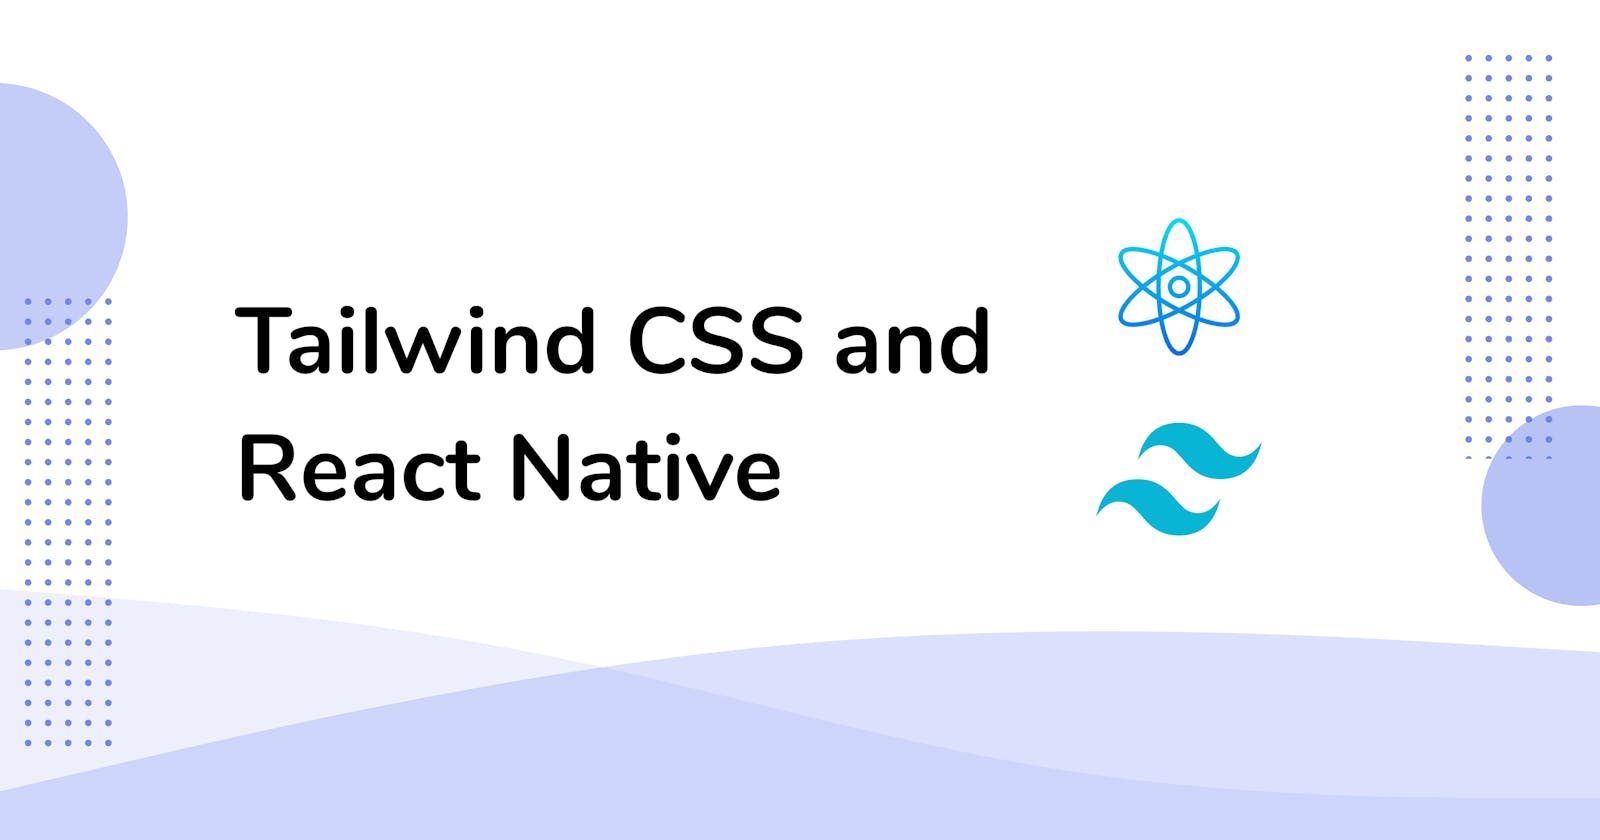 How to use Tailwind CSS in React Native?